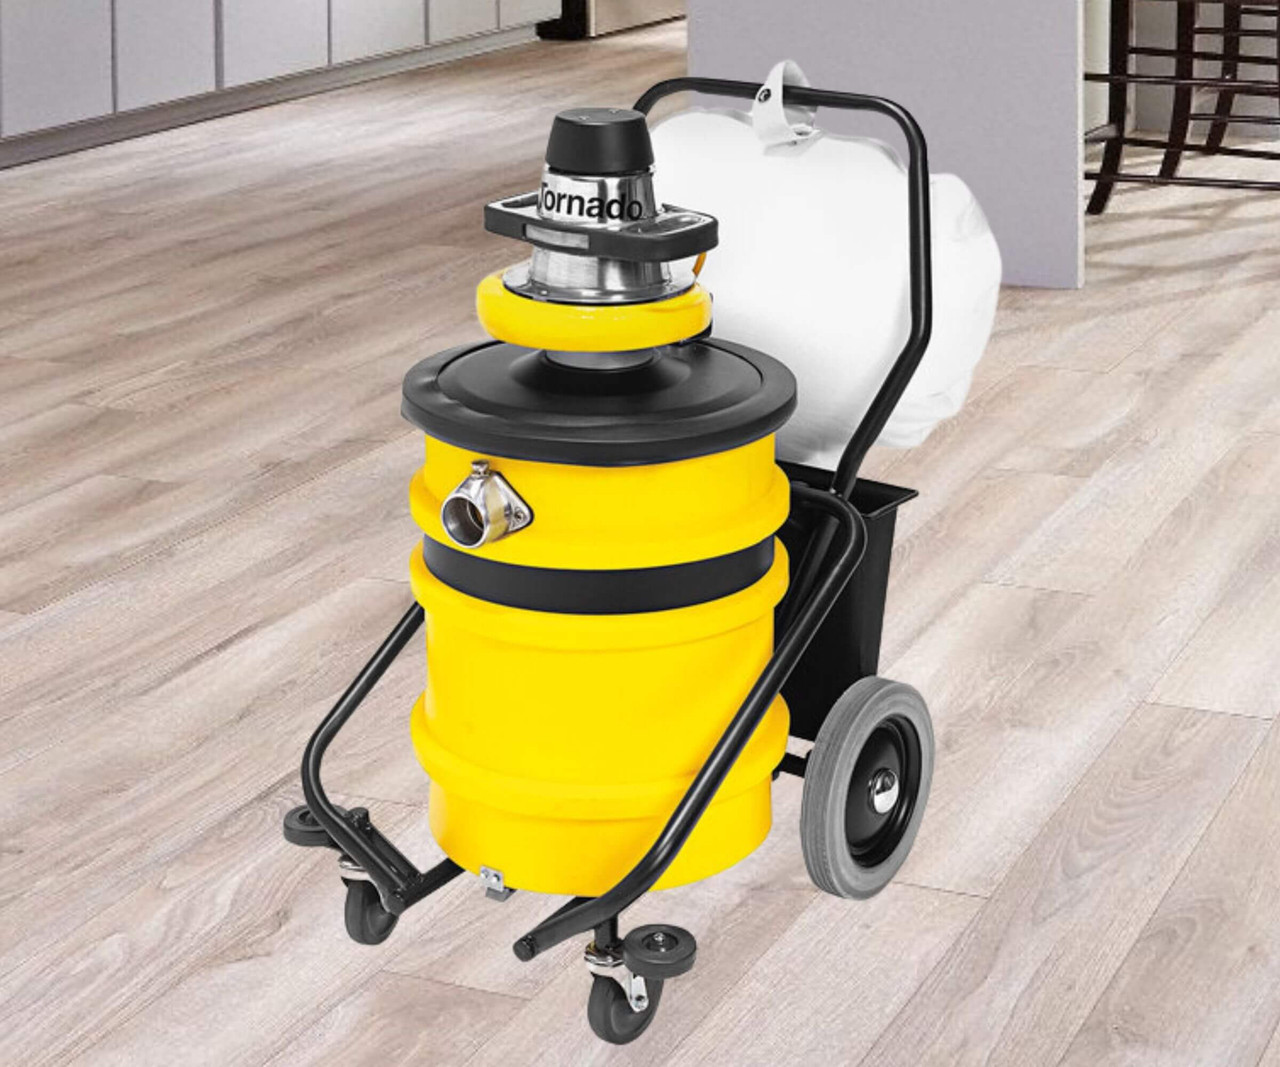 Tornado Taskforce 16 Gallon 2 1/4 HP Wet/Dry Vacuum with Tip and Pour and External Filter - Powerful Cleaning with Convenient Disposal and Advanced Filtration